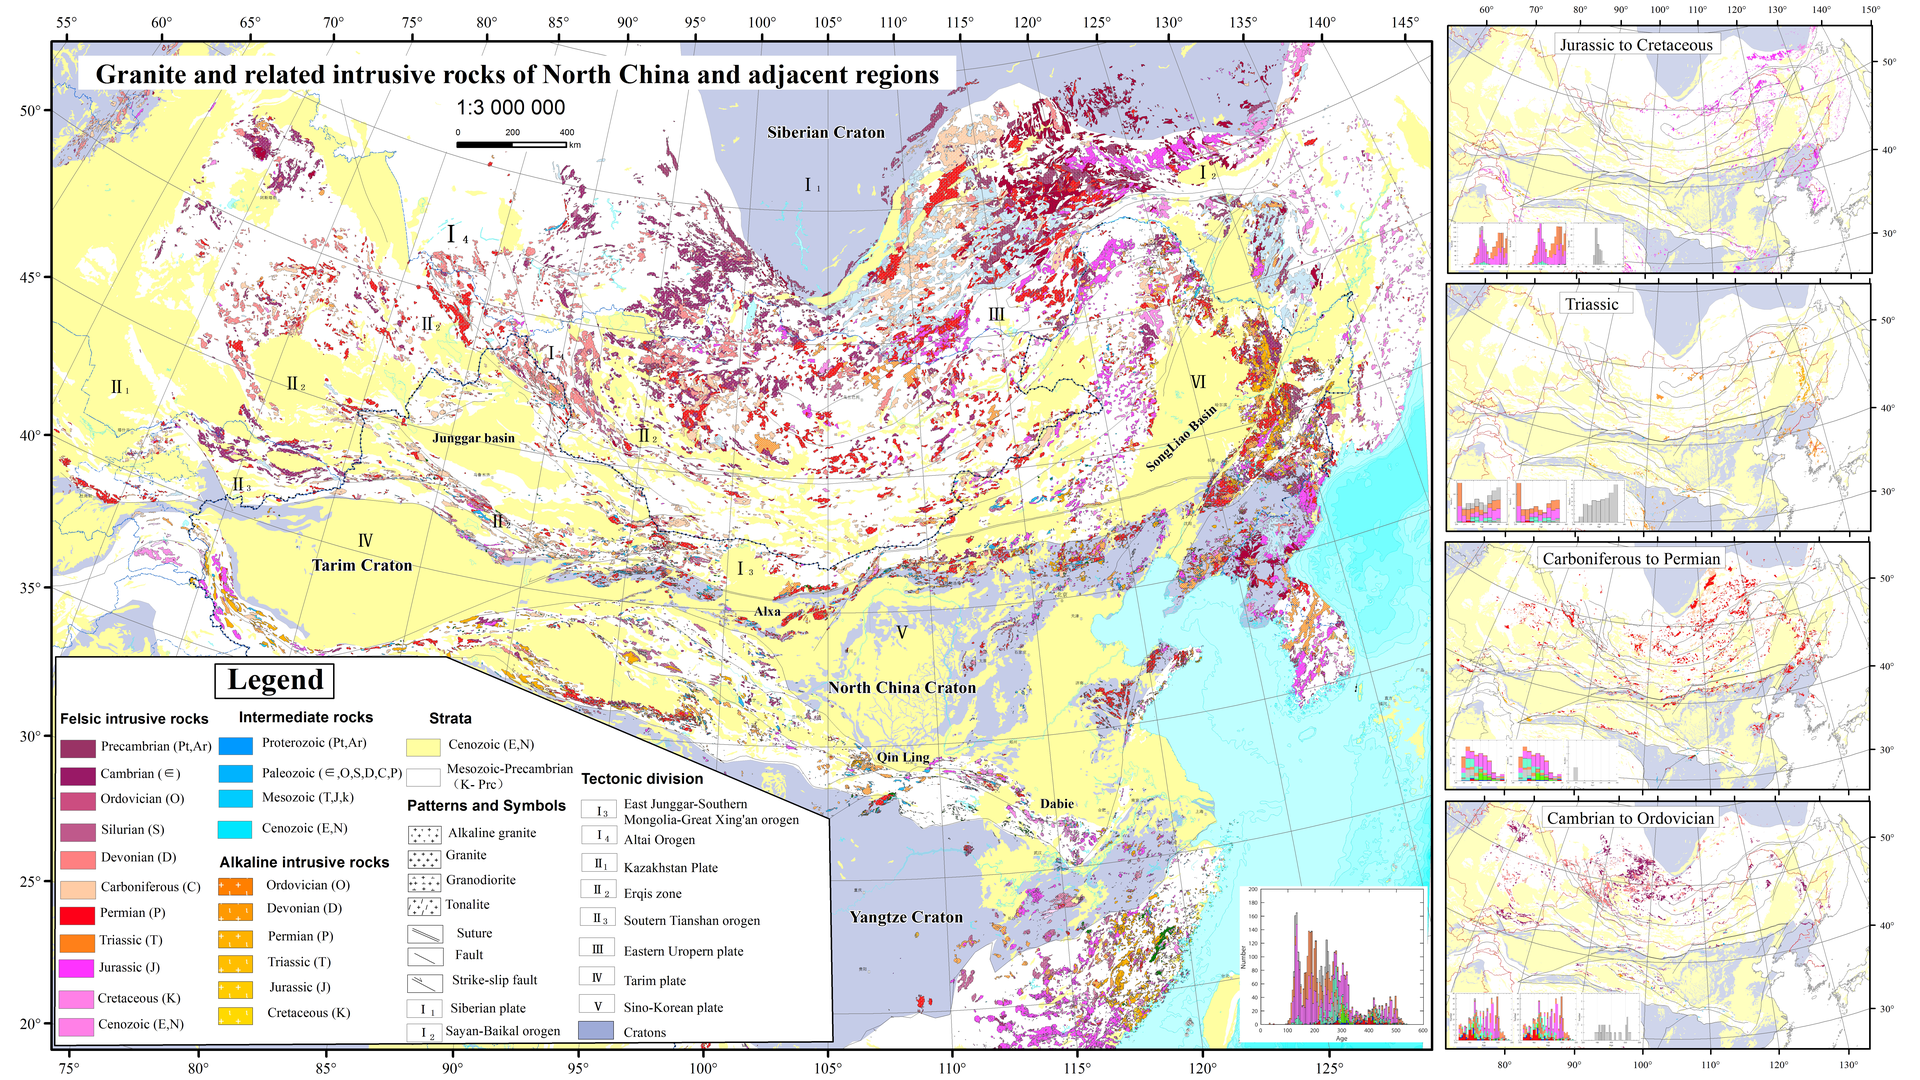 Granitoid and related intrusive rocks of North China and adjacent regions